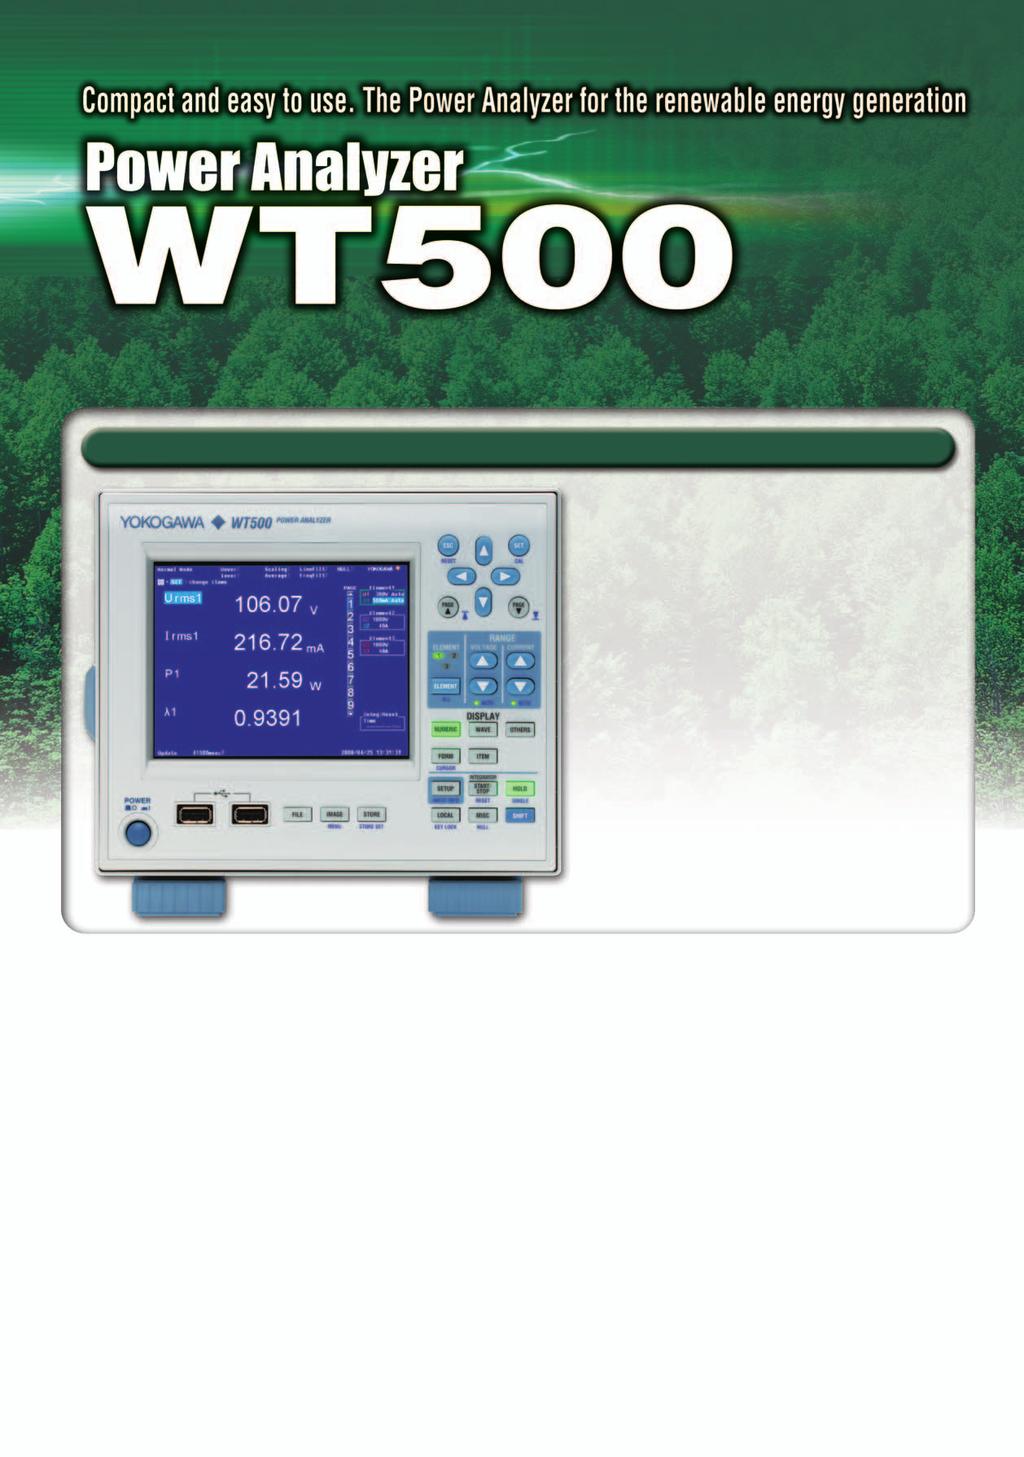 The Power Analyzer features a color TFT and compact body that enables single-phase and three-phase power measurement, achieving ±0.